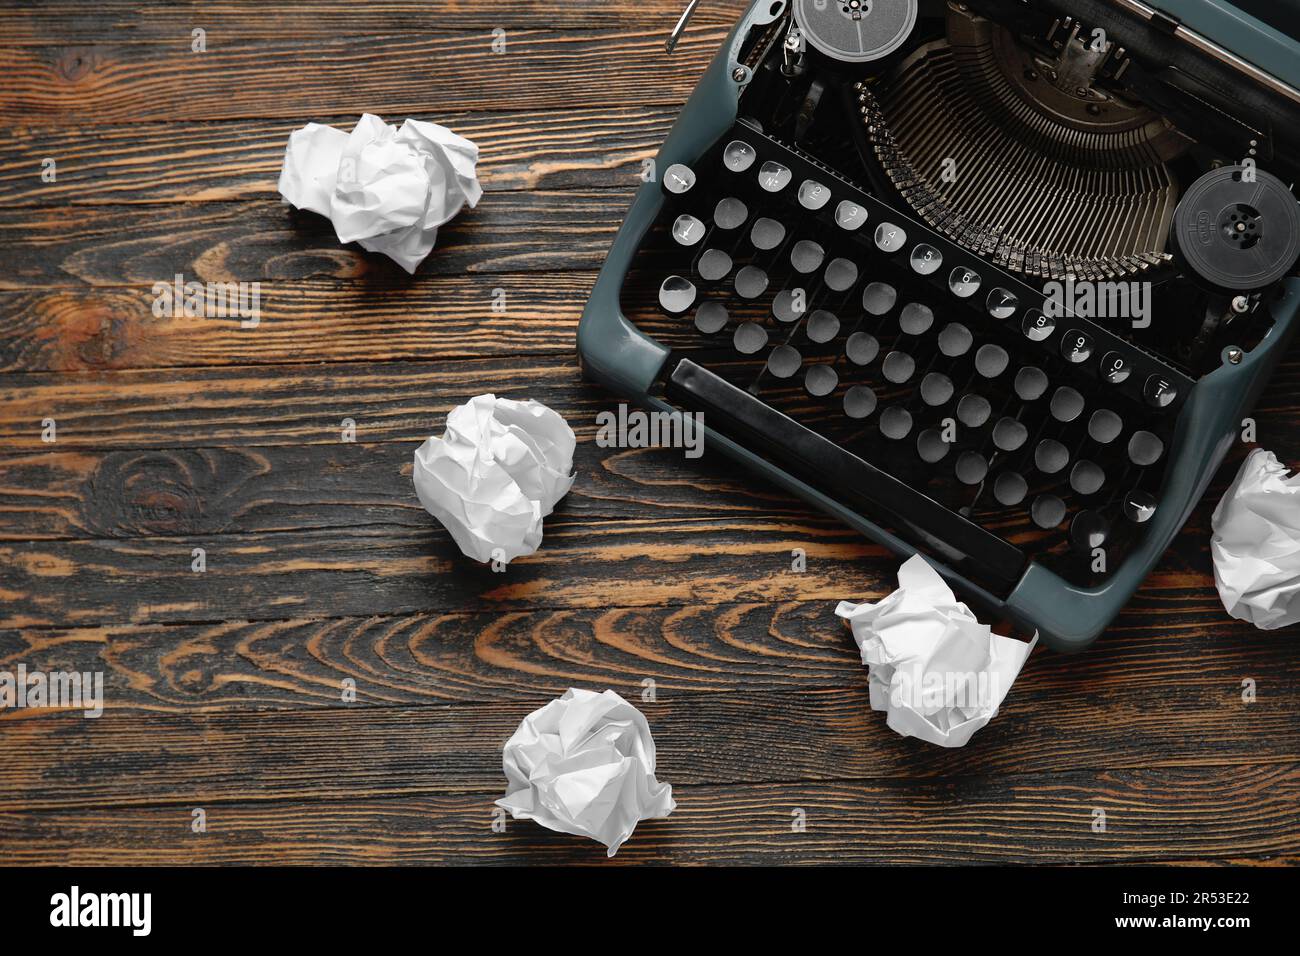 Small typewriter with keyboard in focus over a page of a book. Decoration  item. Concepts of reading, writing, old times, past. Close up. Blurred  background. Stock Photo